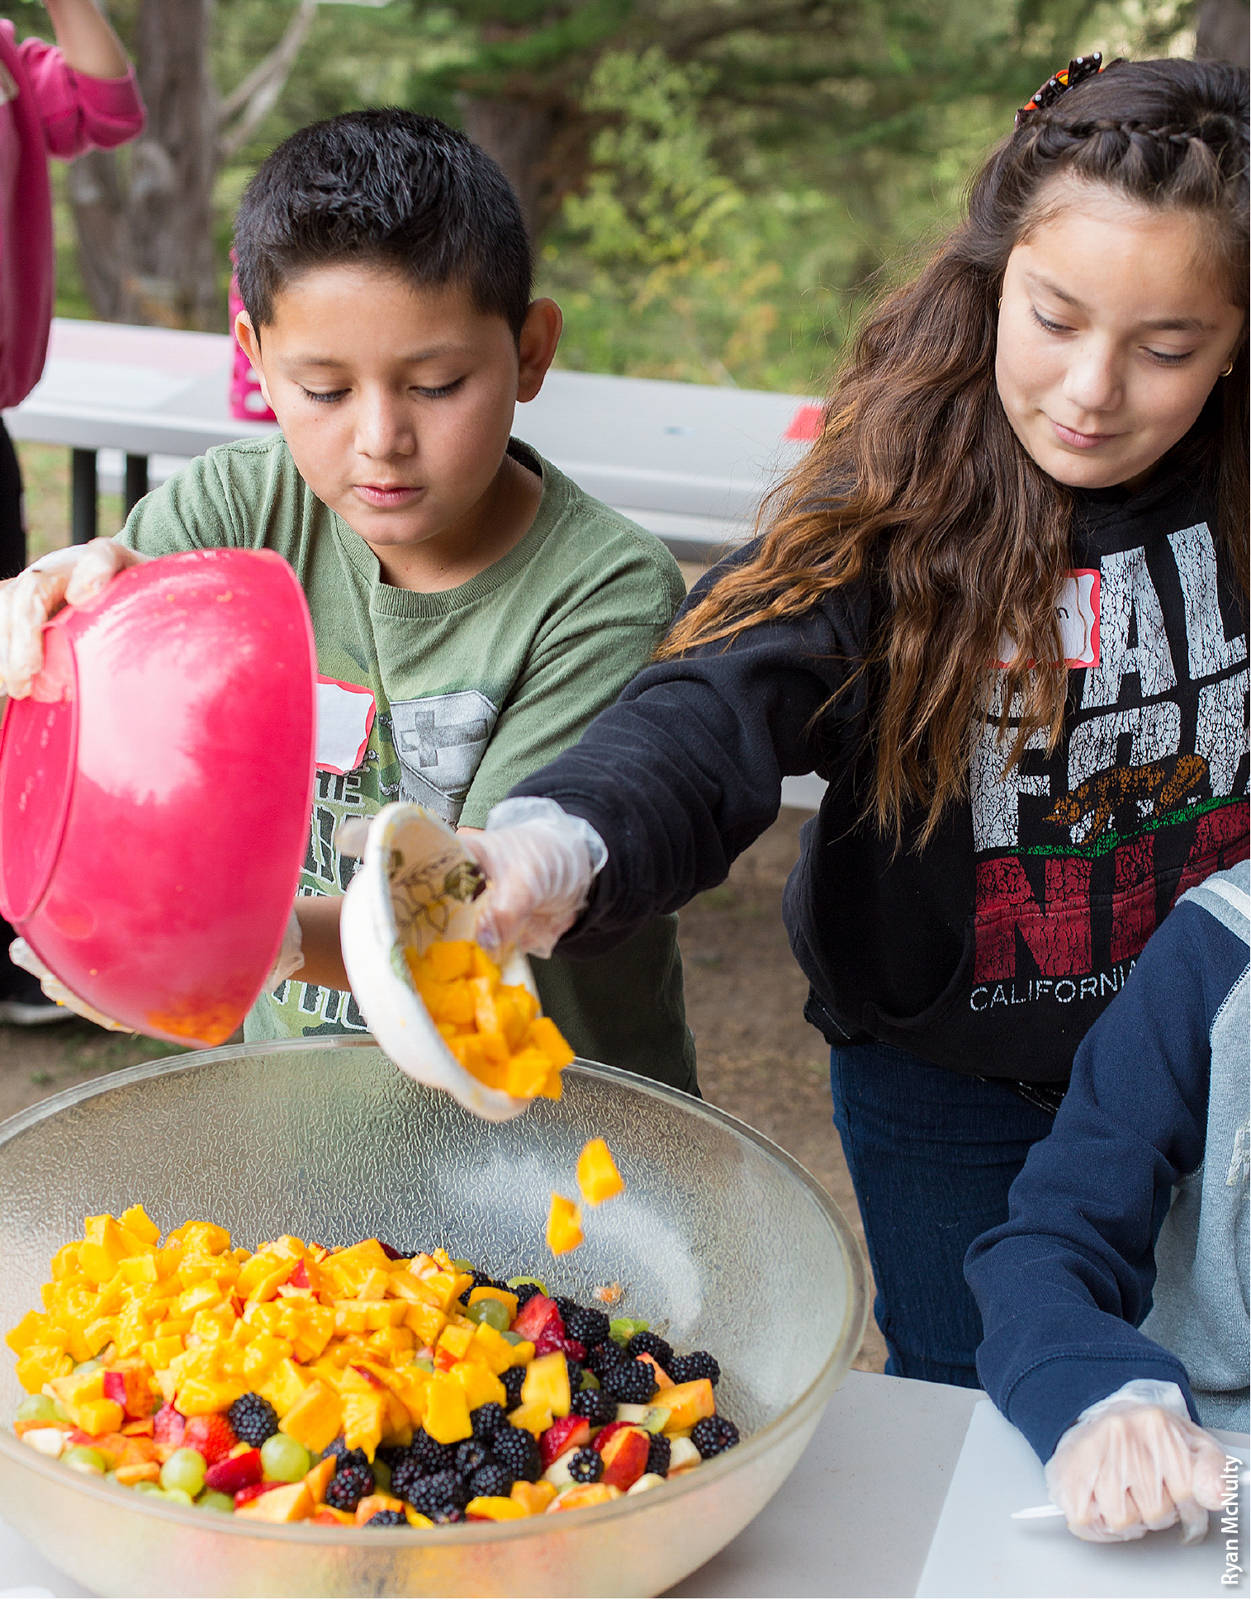 Children tasted new flavors and developed skills as they prepared fresh treats in the garden. Compared to the control group, children who participated in the HLA program reported larger increases in their preferences for gardening, cooking and science.